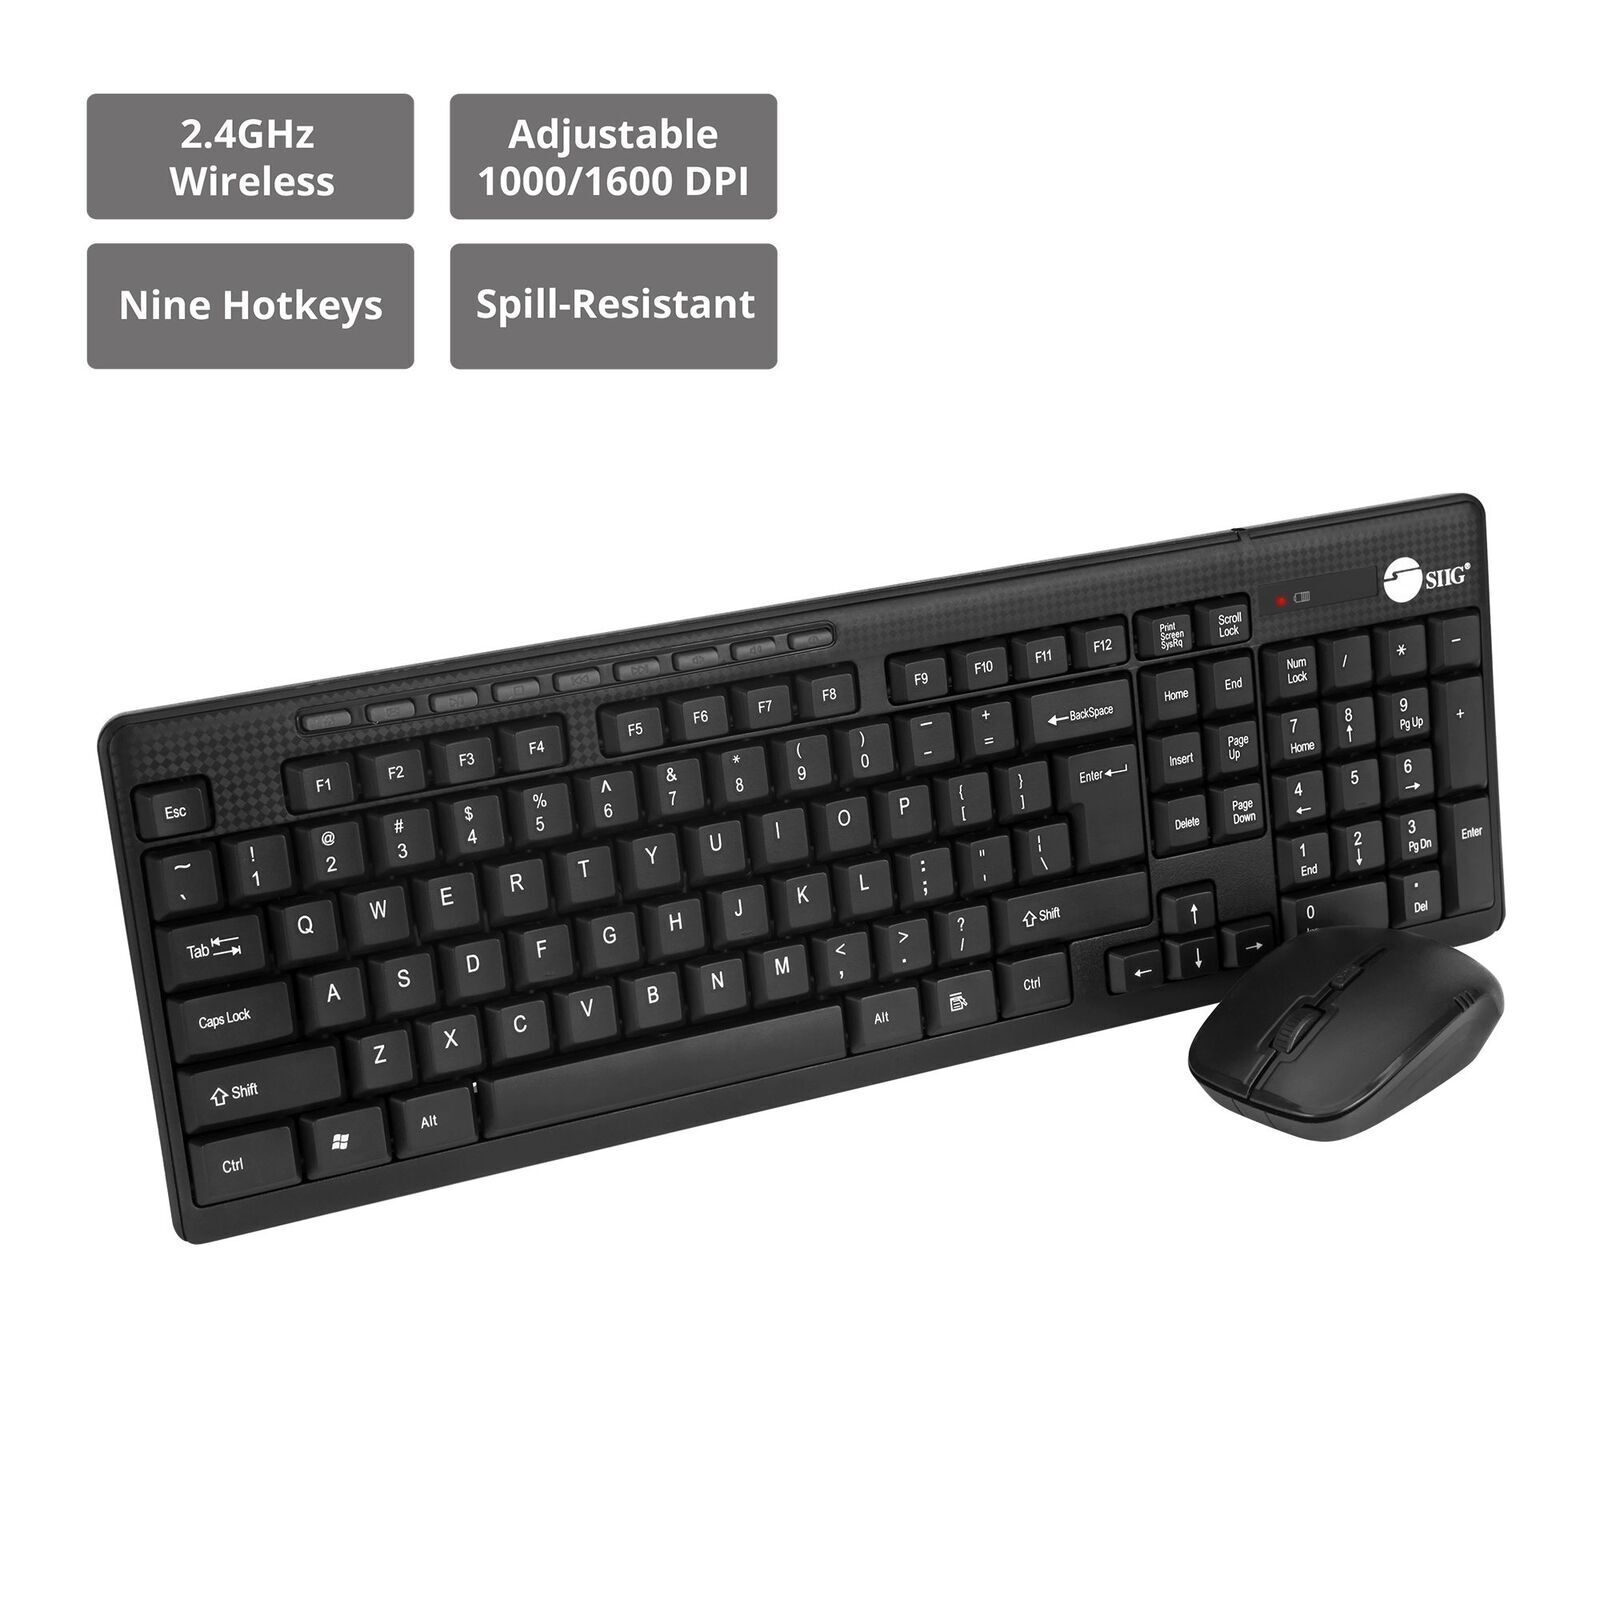 SIIG JK-WR0T12-S1 Wireless Extra-Duo Keyboard & Mouse - USB 2.0 Wireless RF